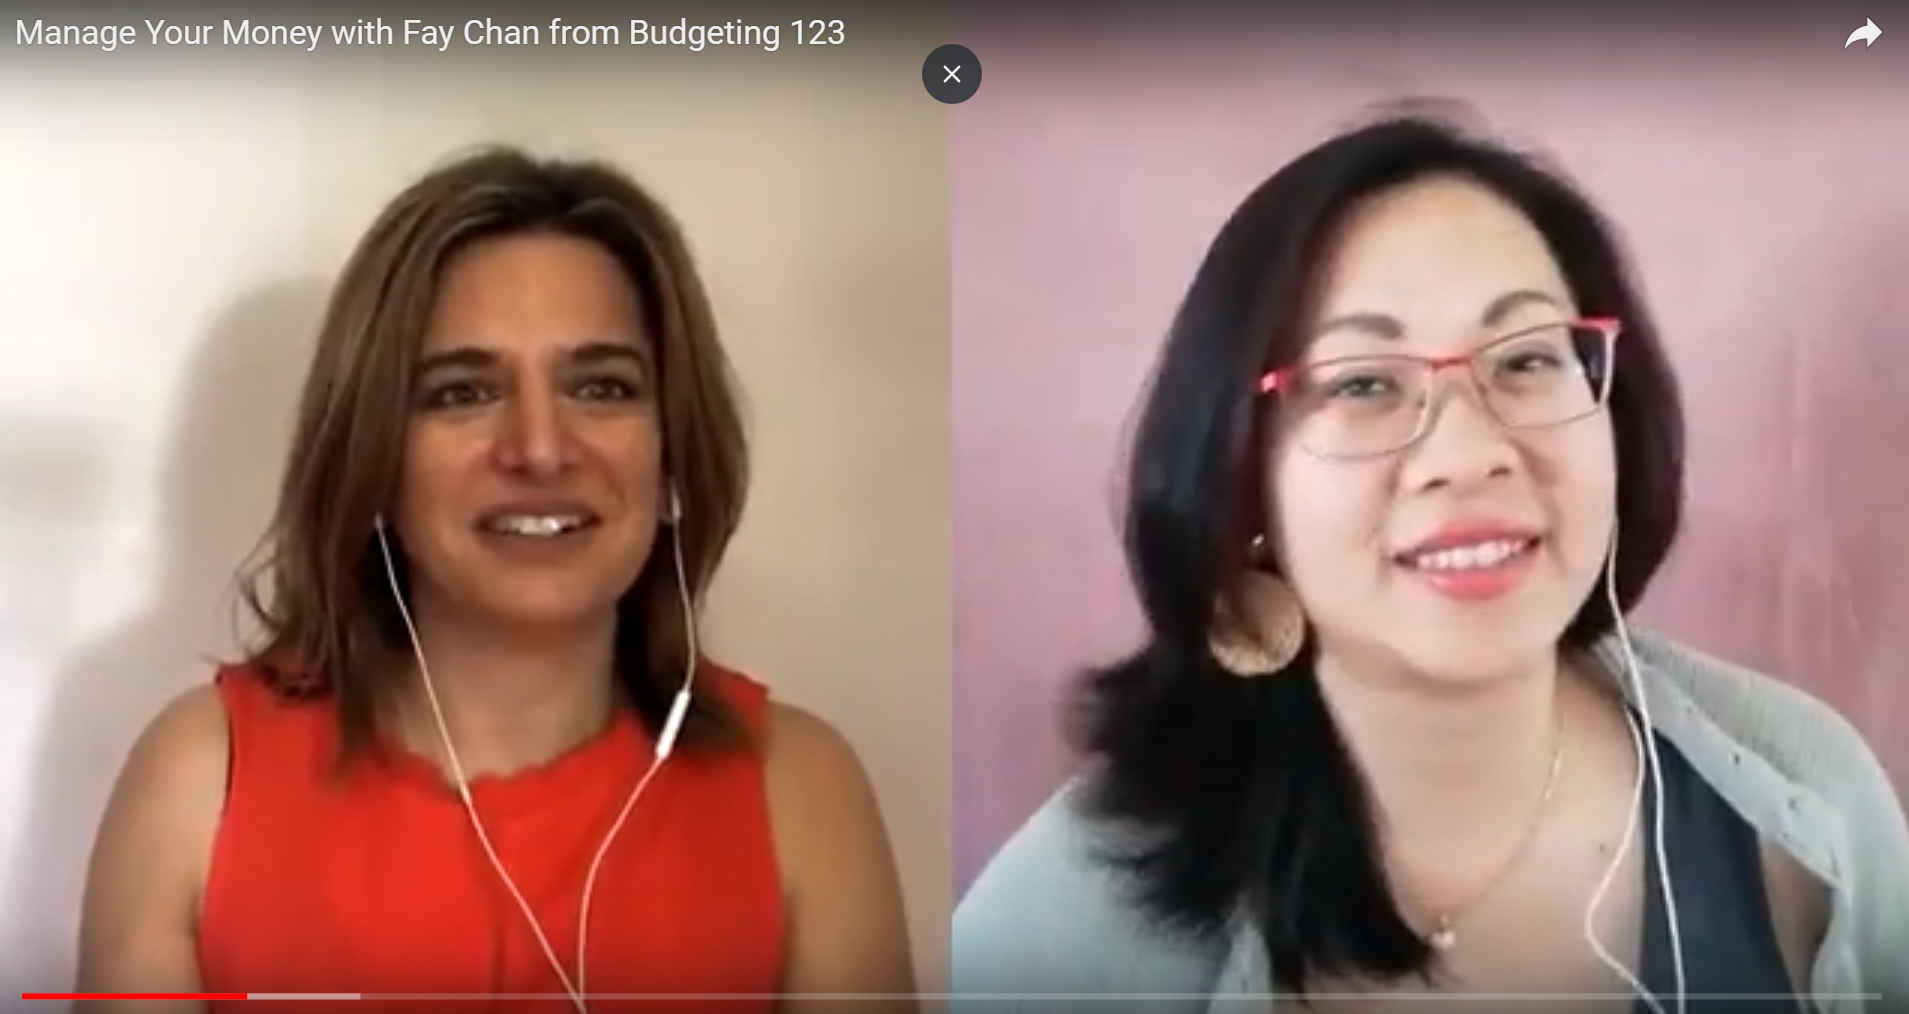 Manage Your Money with Fay Chan from Budgeting 123